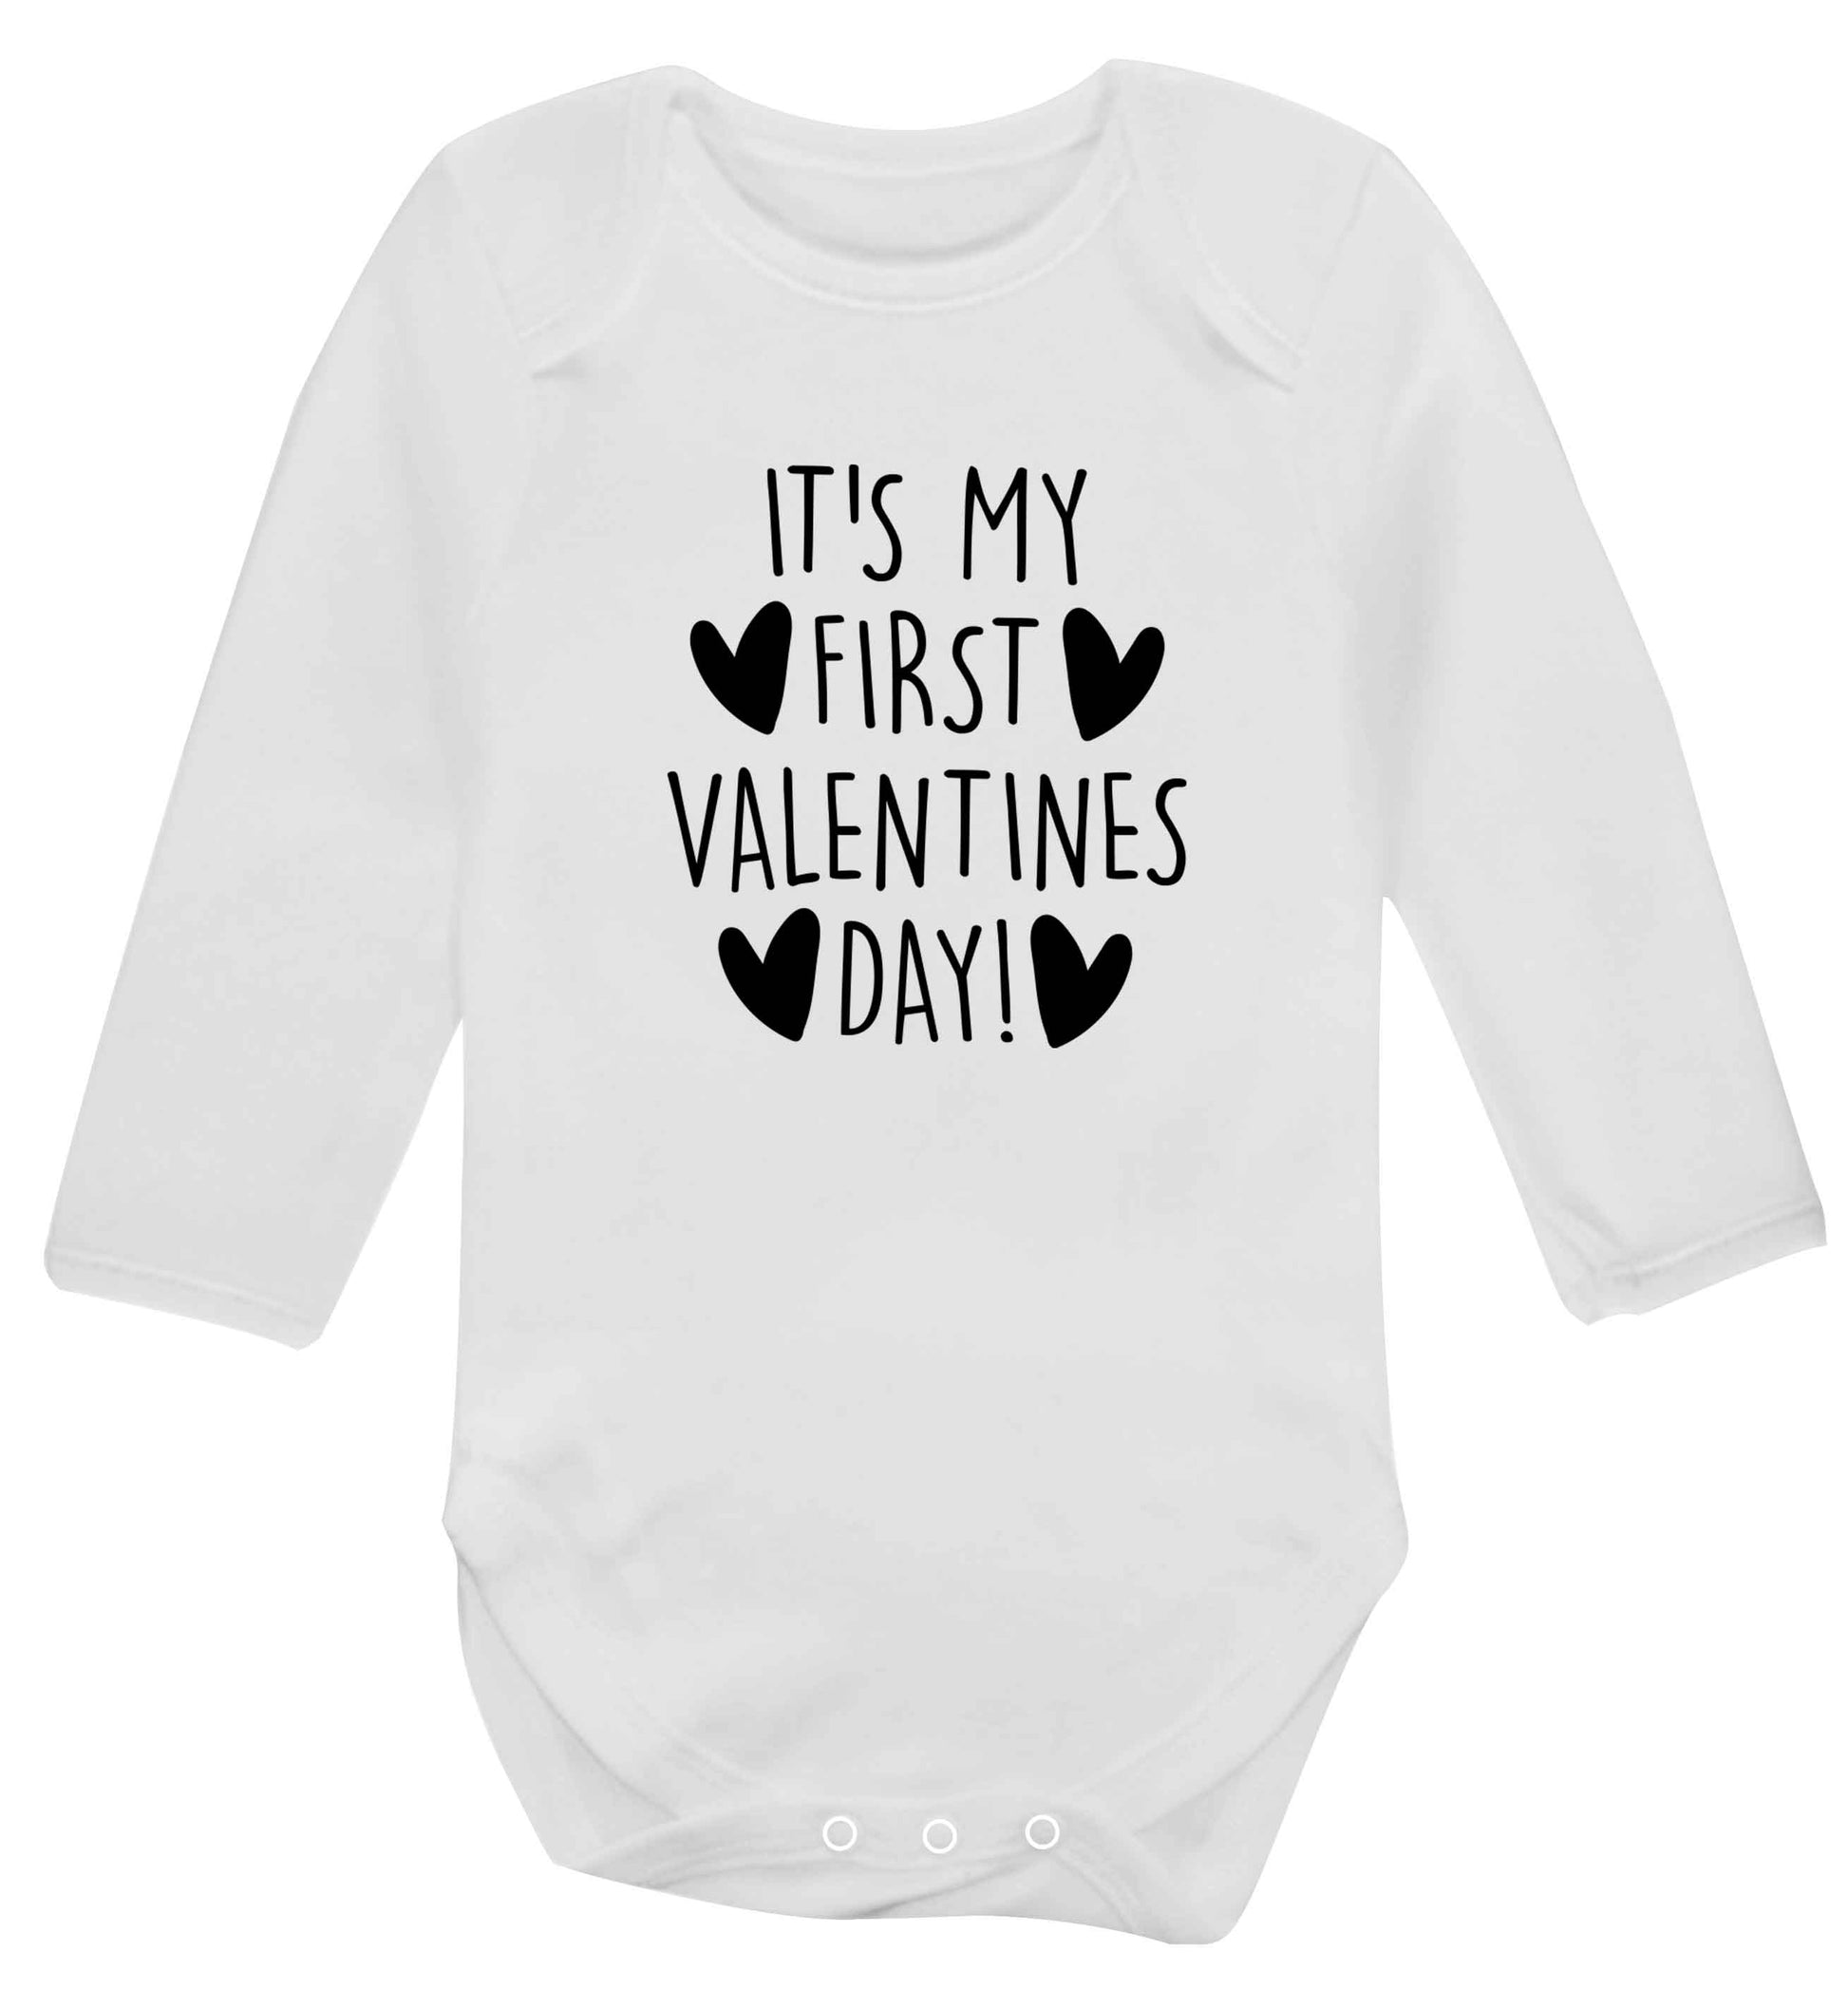 It's my first valentines day! baby vest long sleeved white 6-12 months